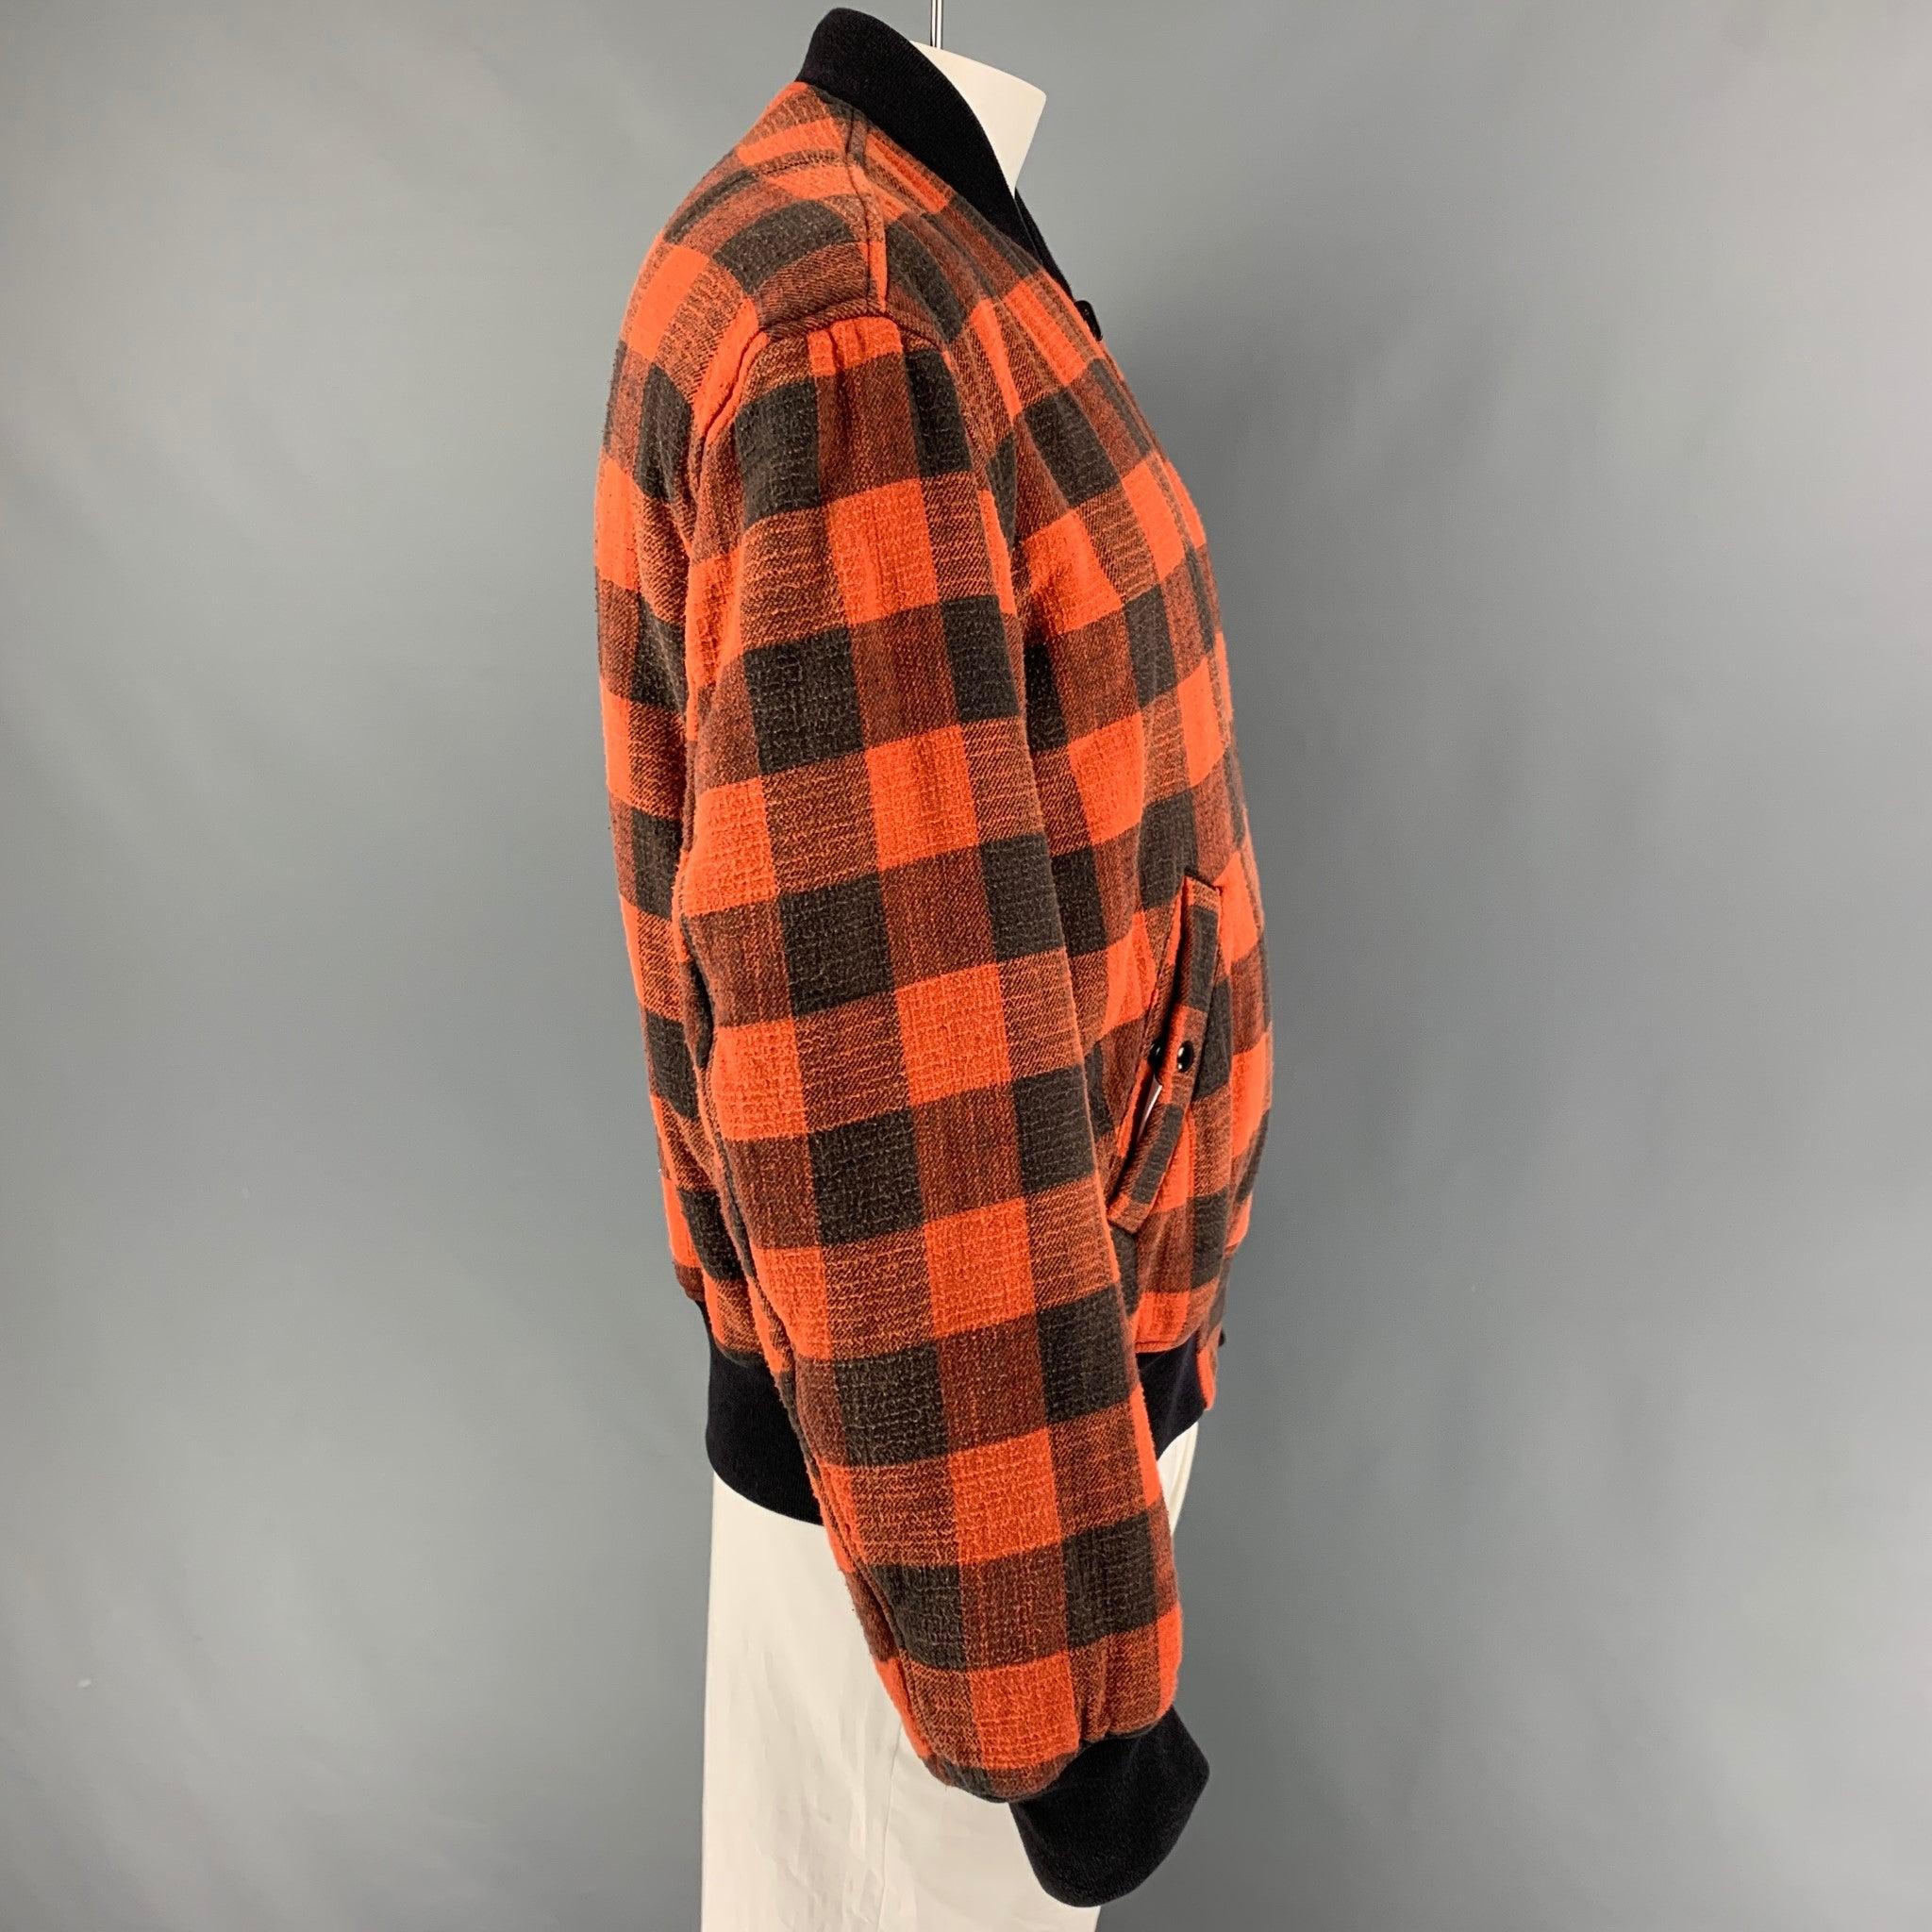 R13 jacket comes in a orange & black plaid cotton featuring a reversible style, oversized, bomber, ribbed hem, front pockets, and a full zip up closure.
Very Good
Pre-Owned Condition. 

Marked:   M 

Measurements: 
 
Shoulder: 22.5 inches  Chest: 50